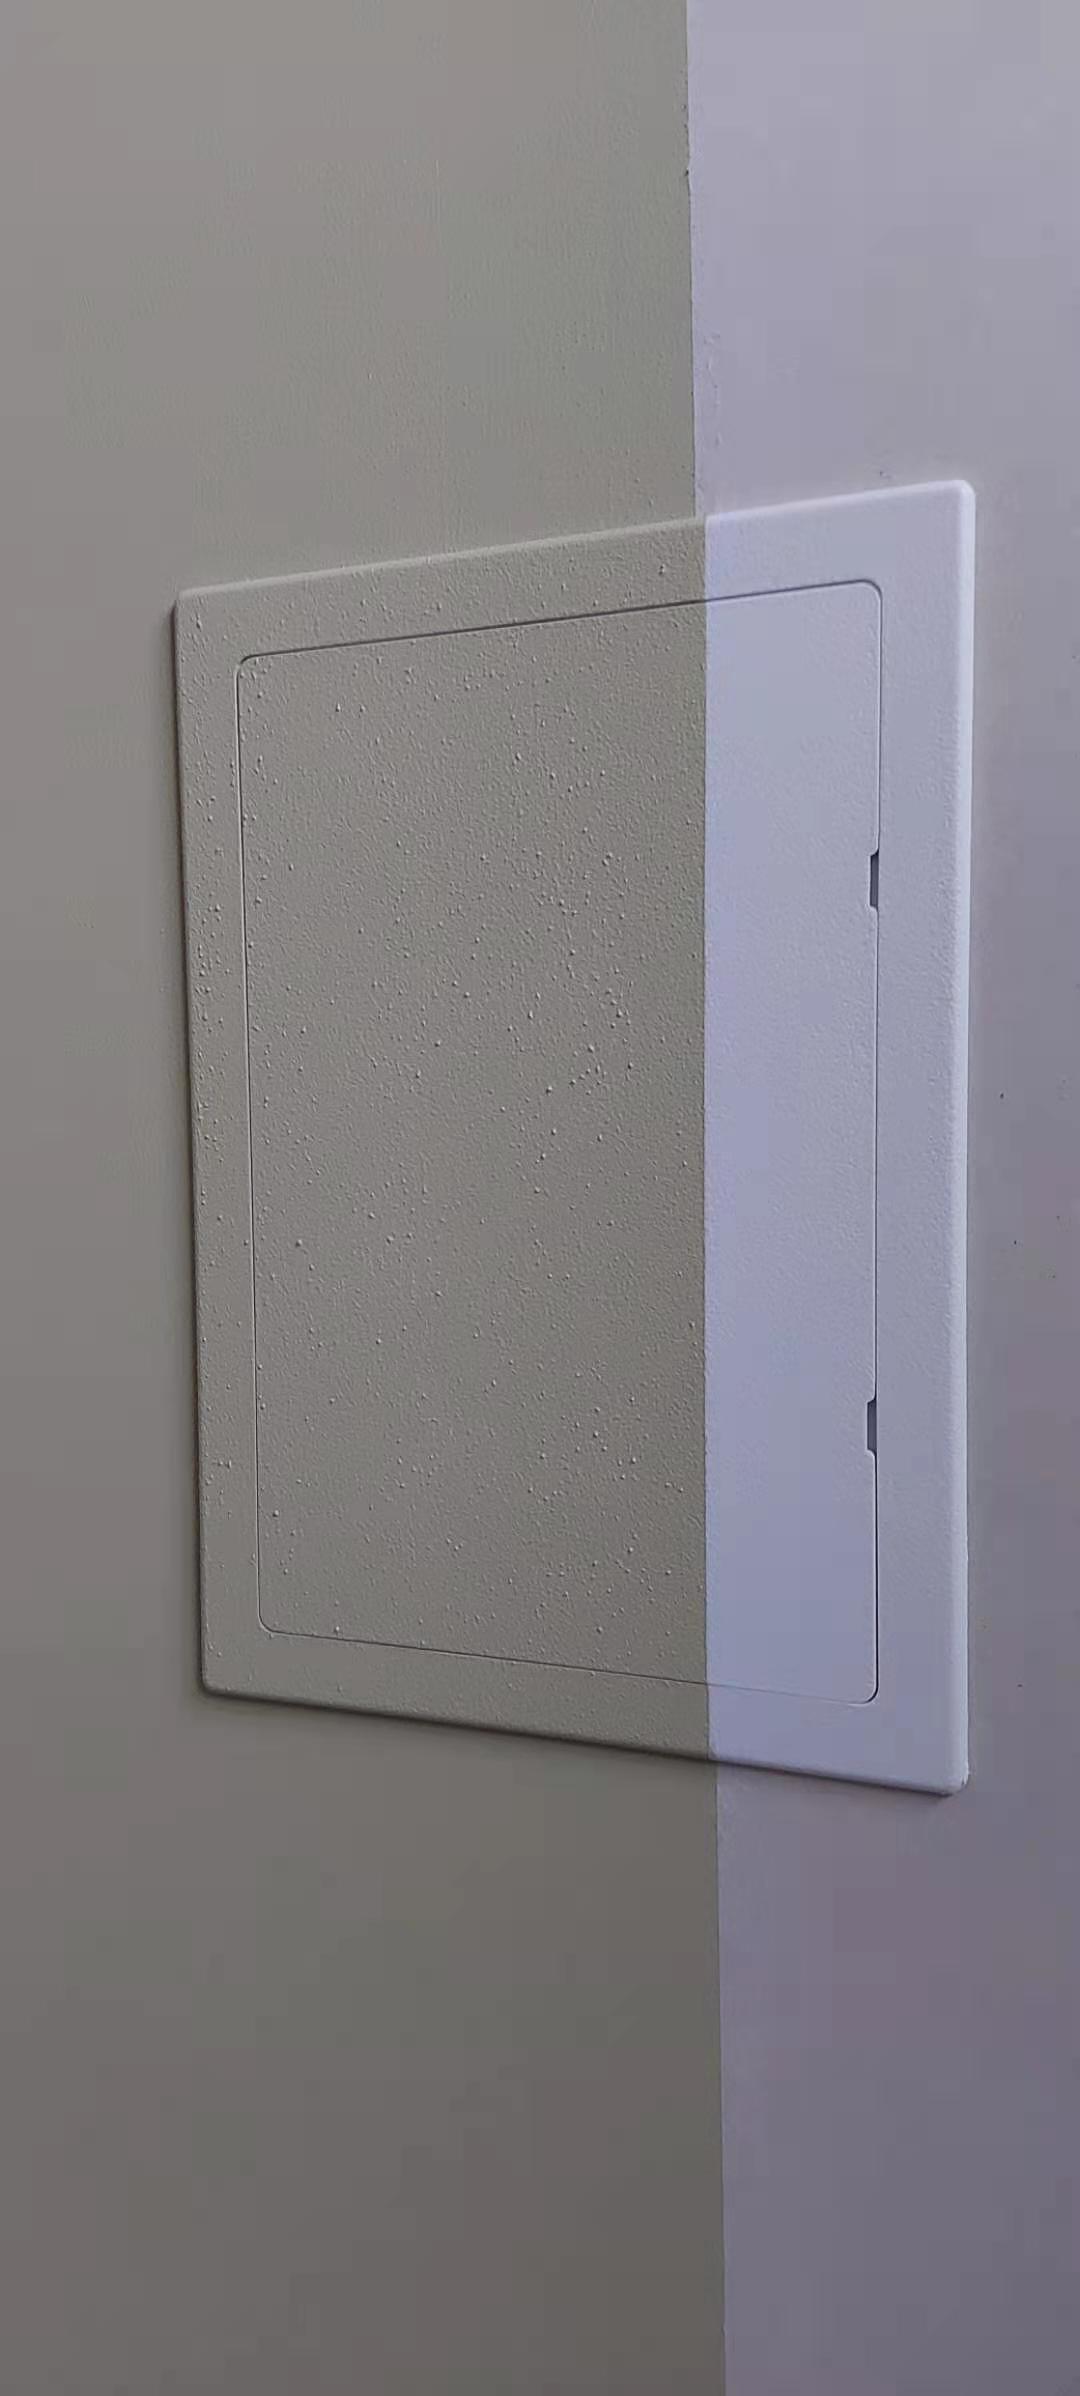 When the plastic access panel should be installed onto the wall ?